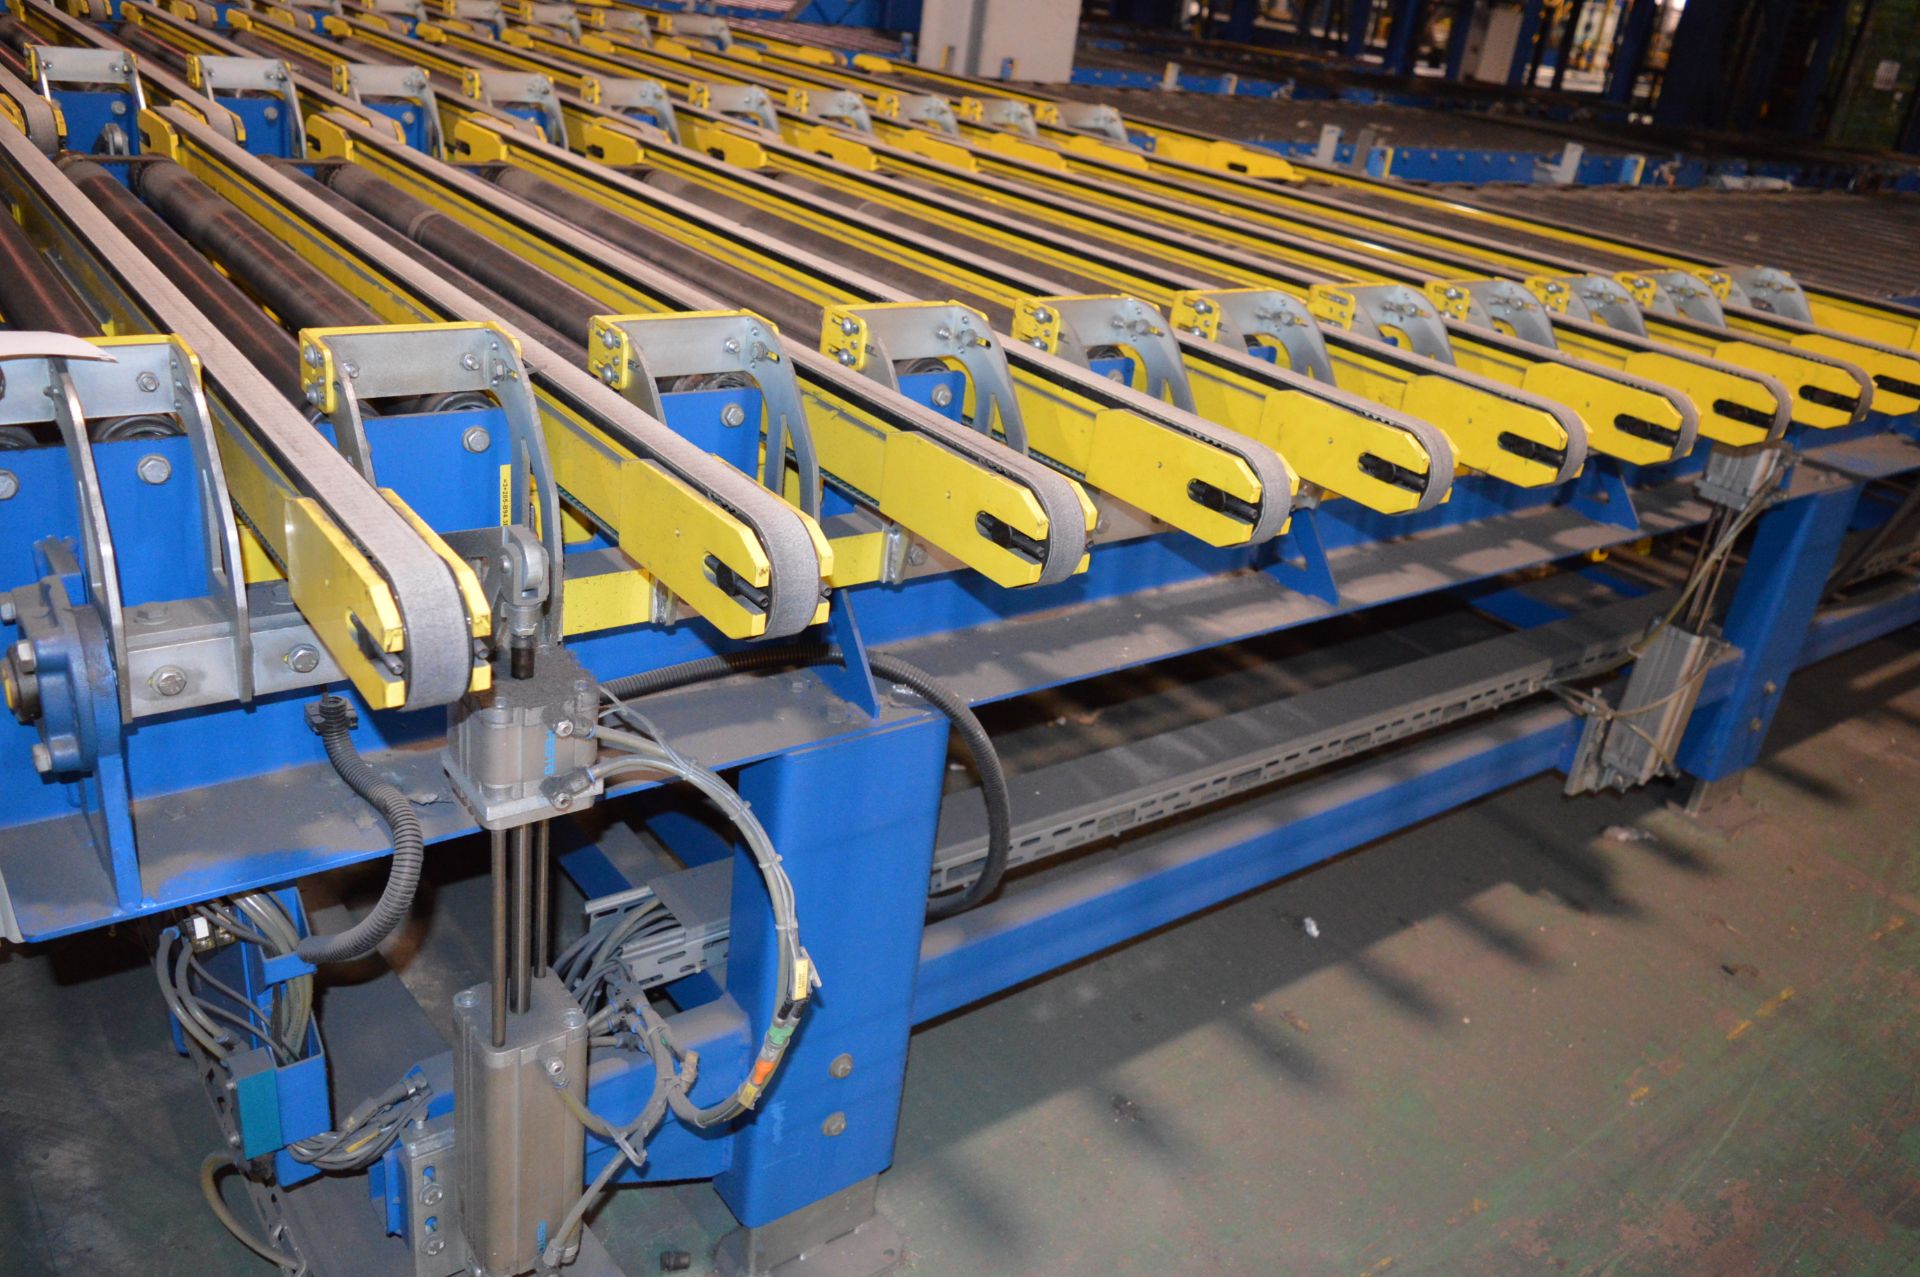 2 x Kraft, cross transfer motorised conveyors with outfeed rollers (2006) Each 4.7m (l) x 1.75m (